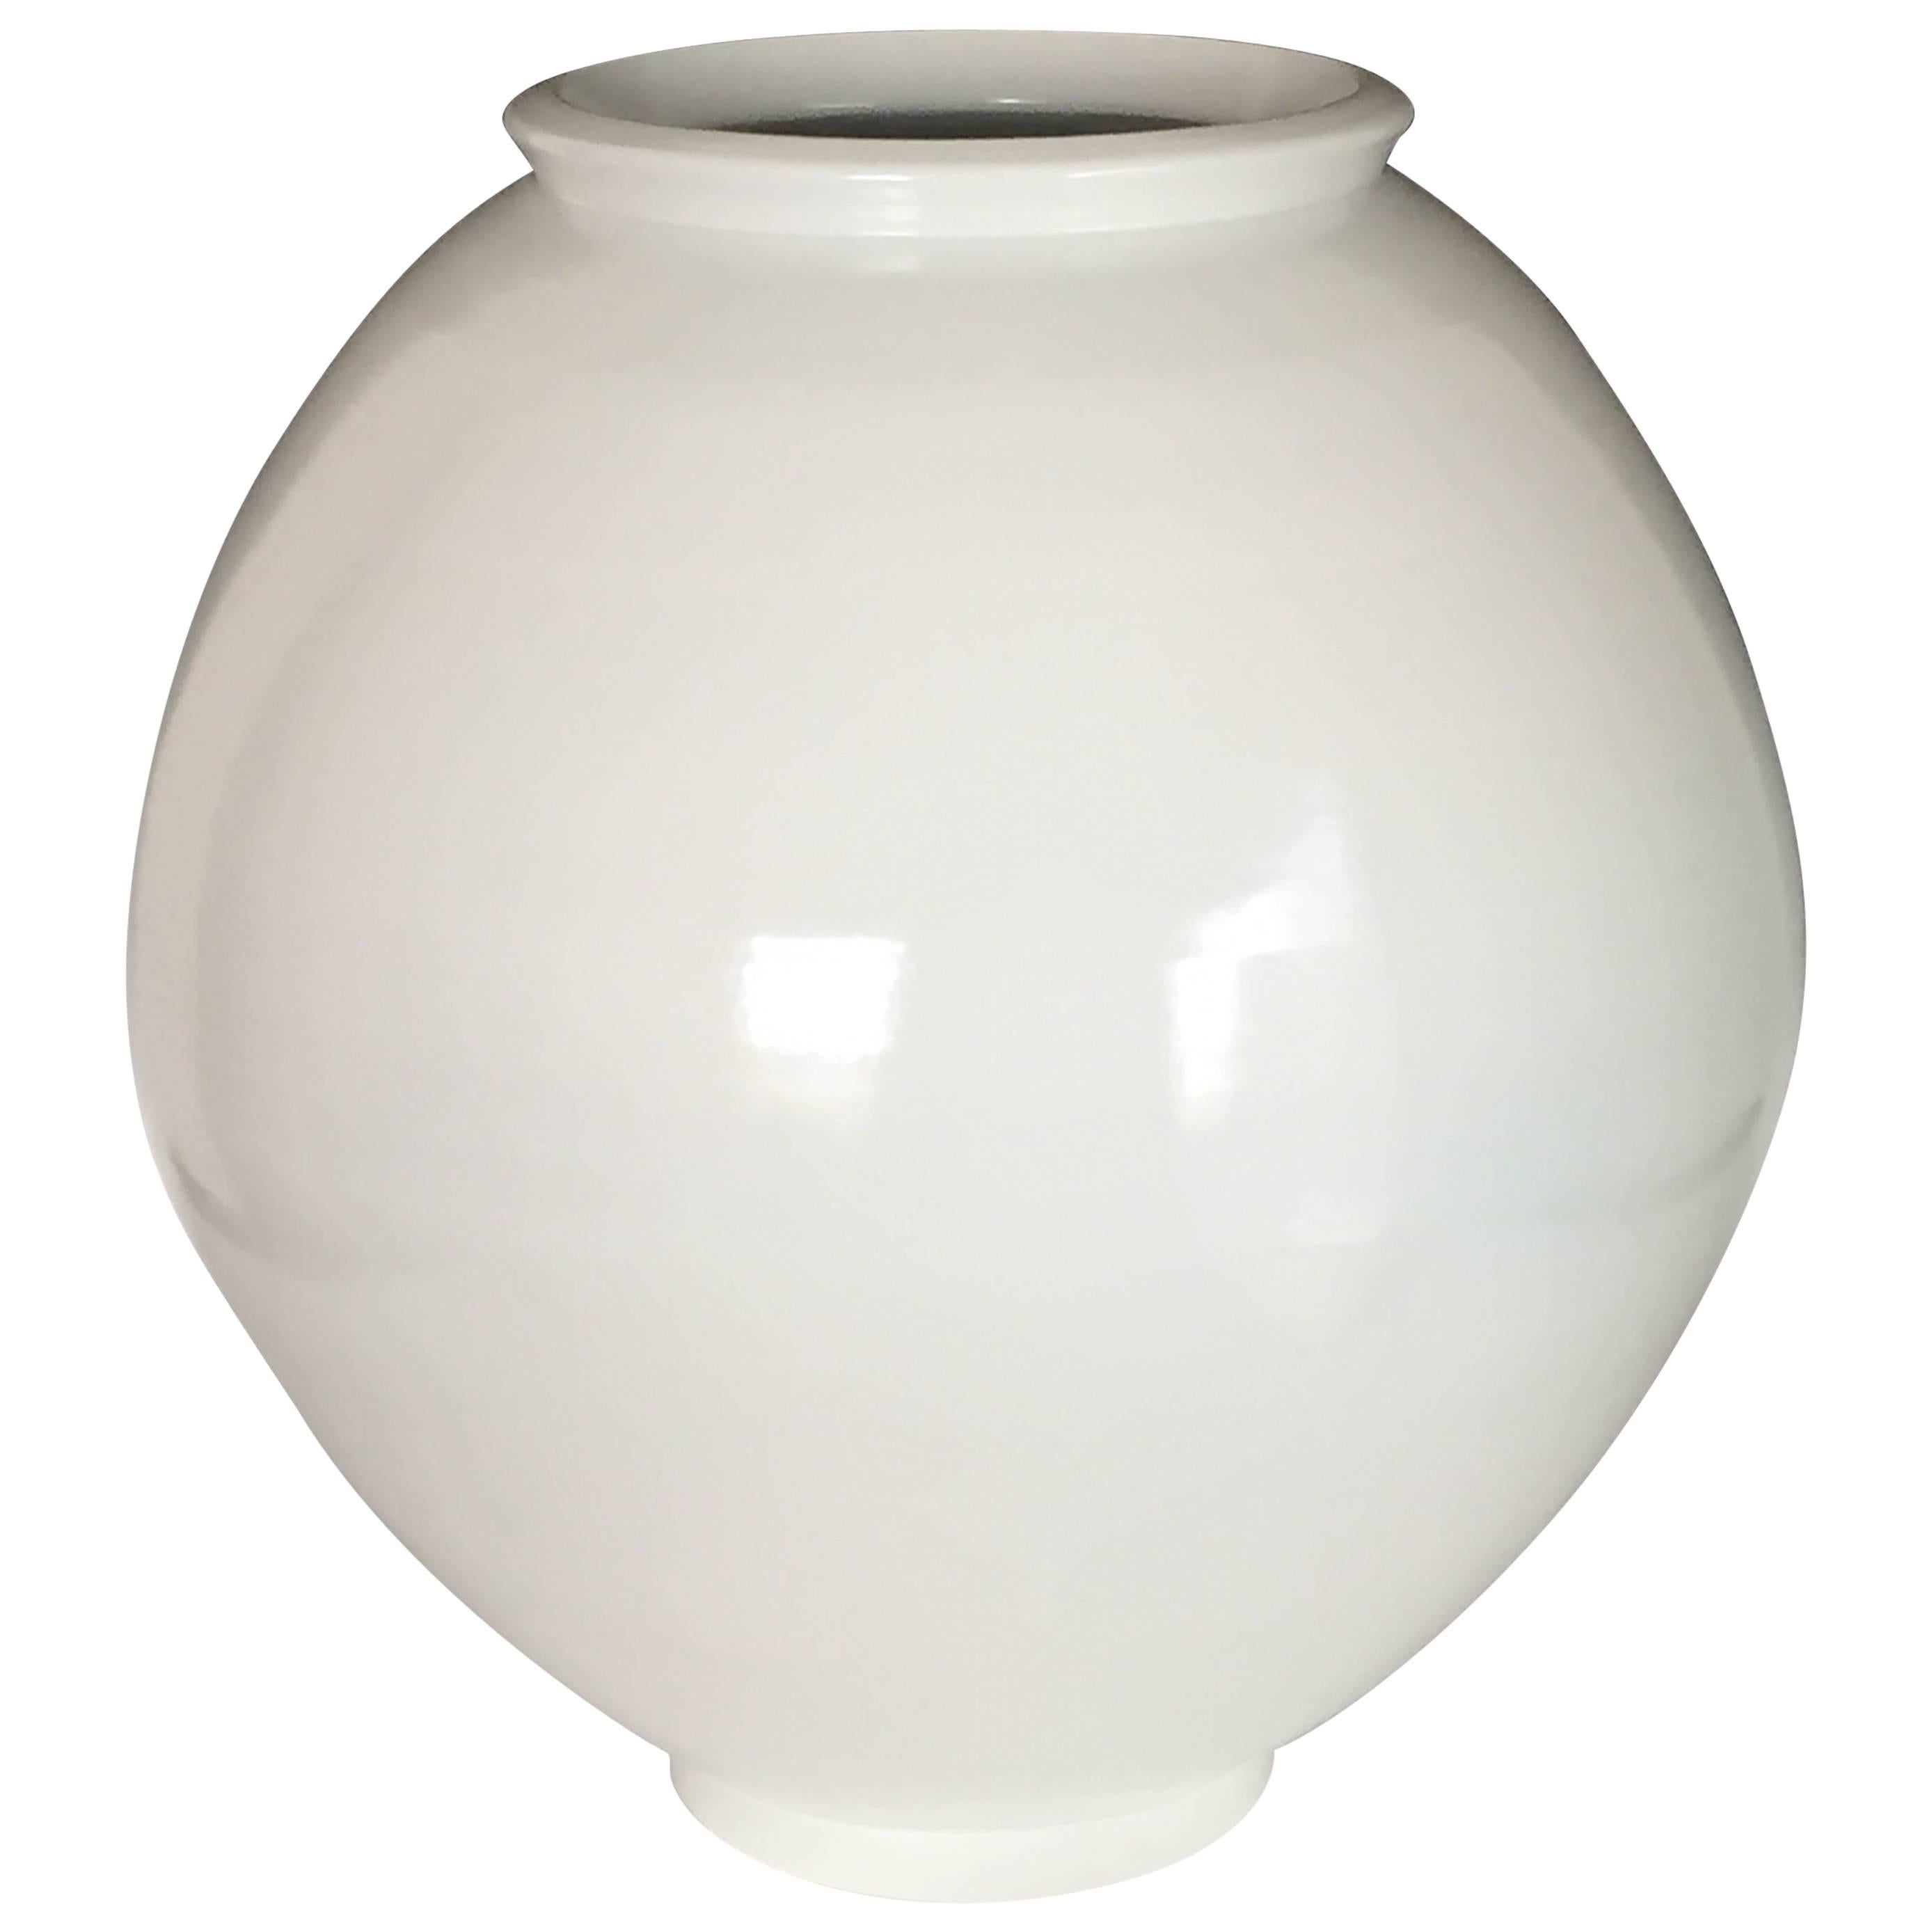 Large Contemporary Porcelain Moon Jar by Kim Yikyung